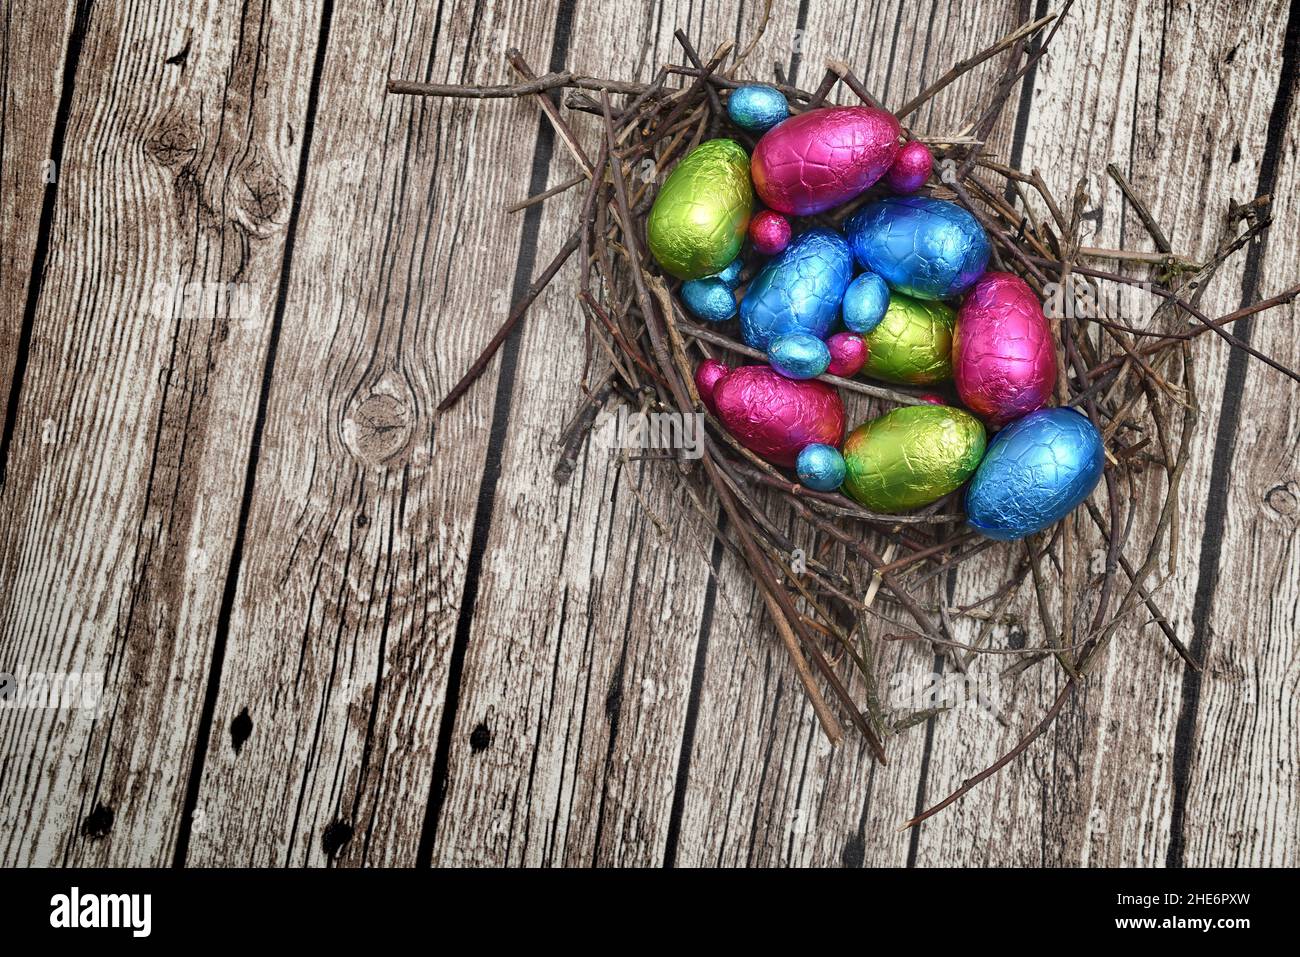 Foil wrapped colourful easter eggs in pink, green, blue and yellow in a natural nest made of sticks and twigs, against a multi grain brown background. Stock Photo